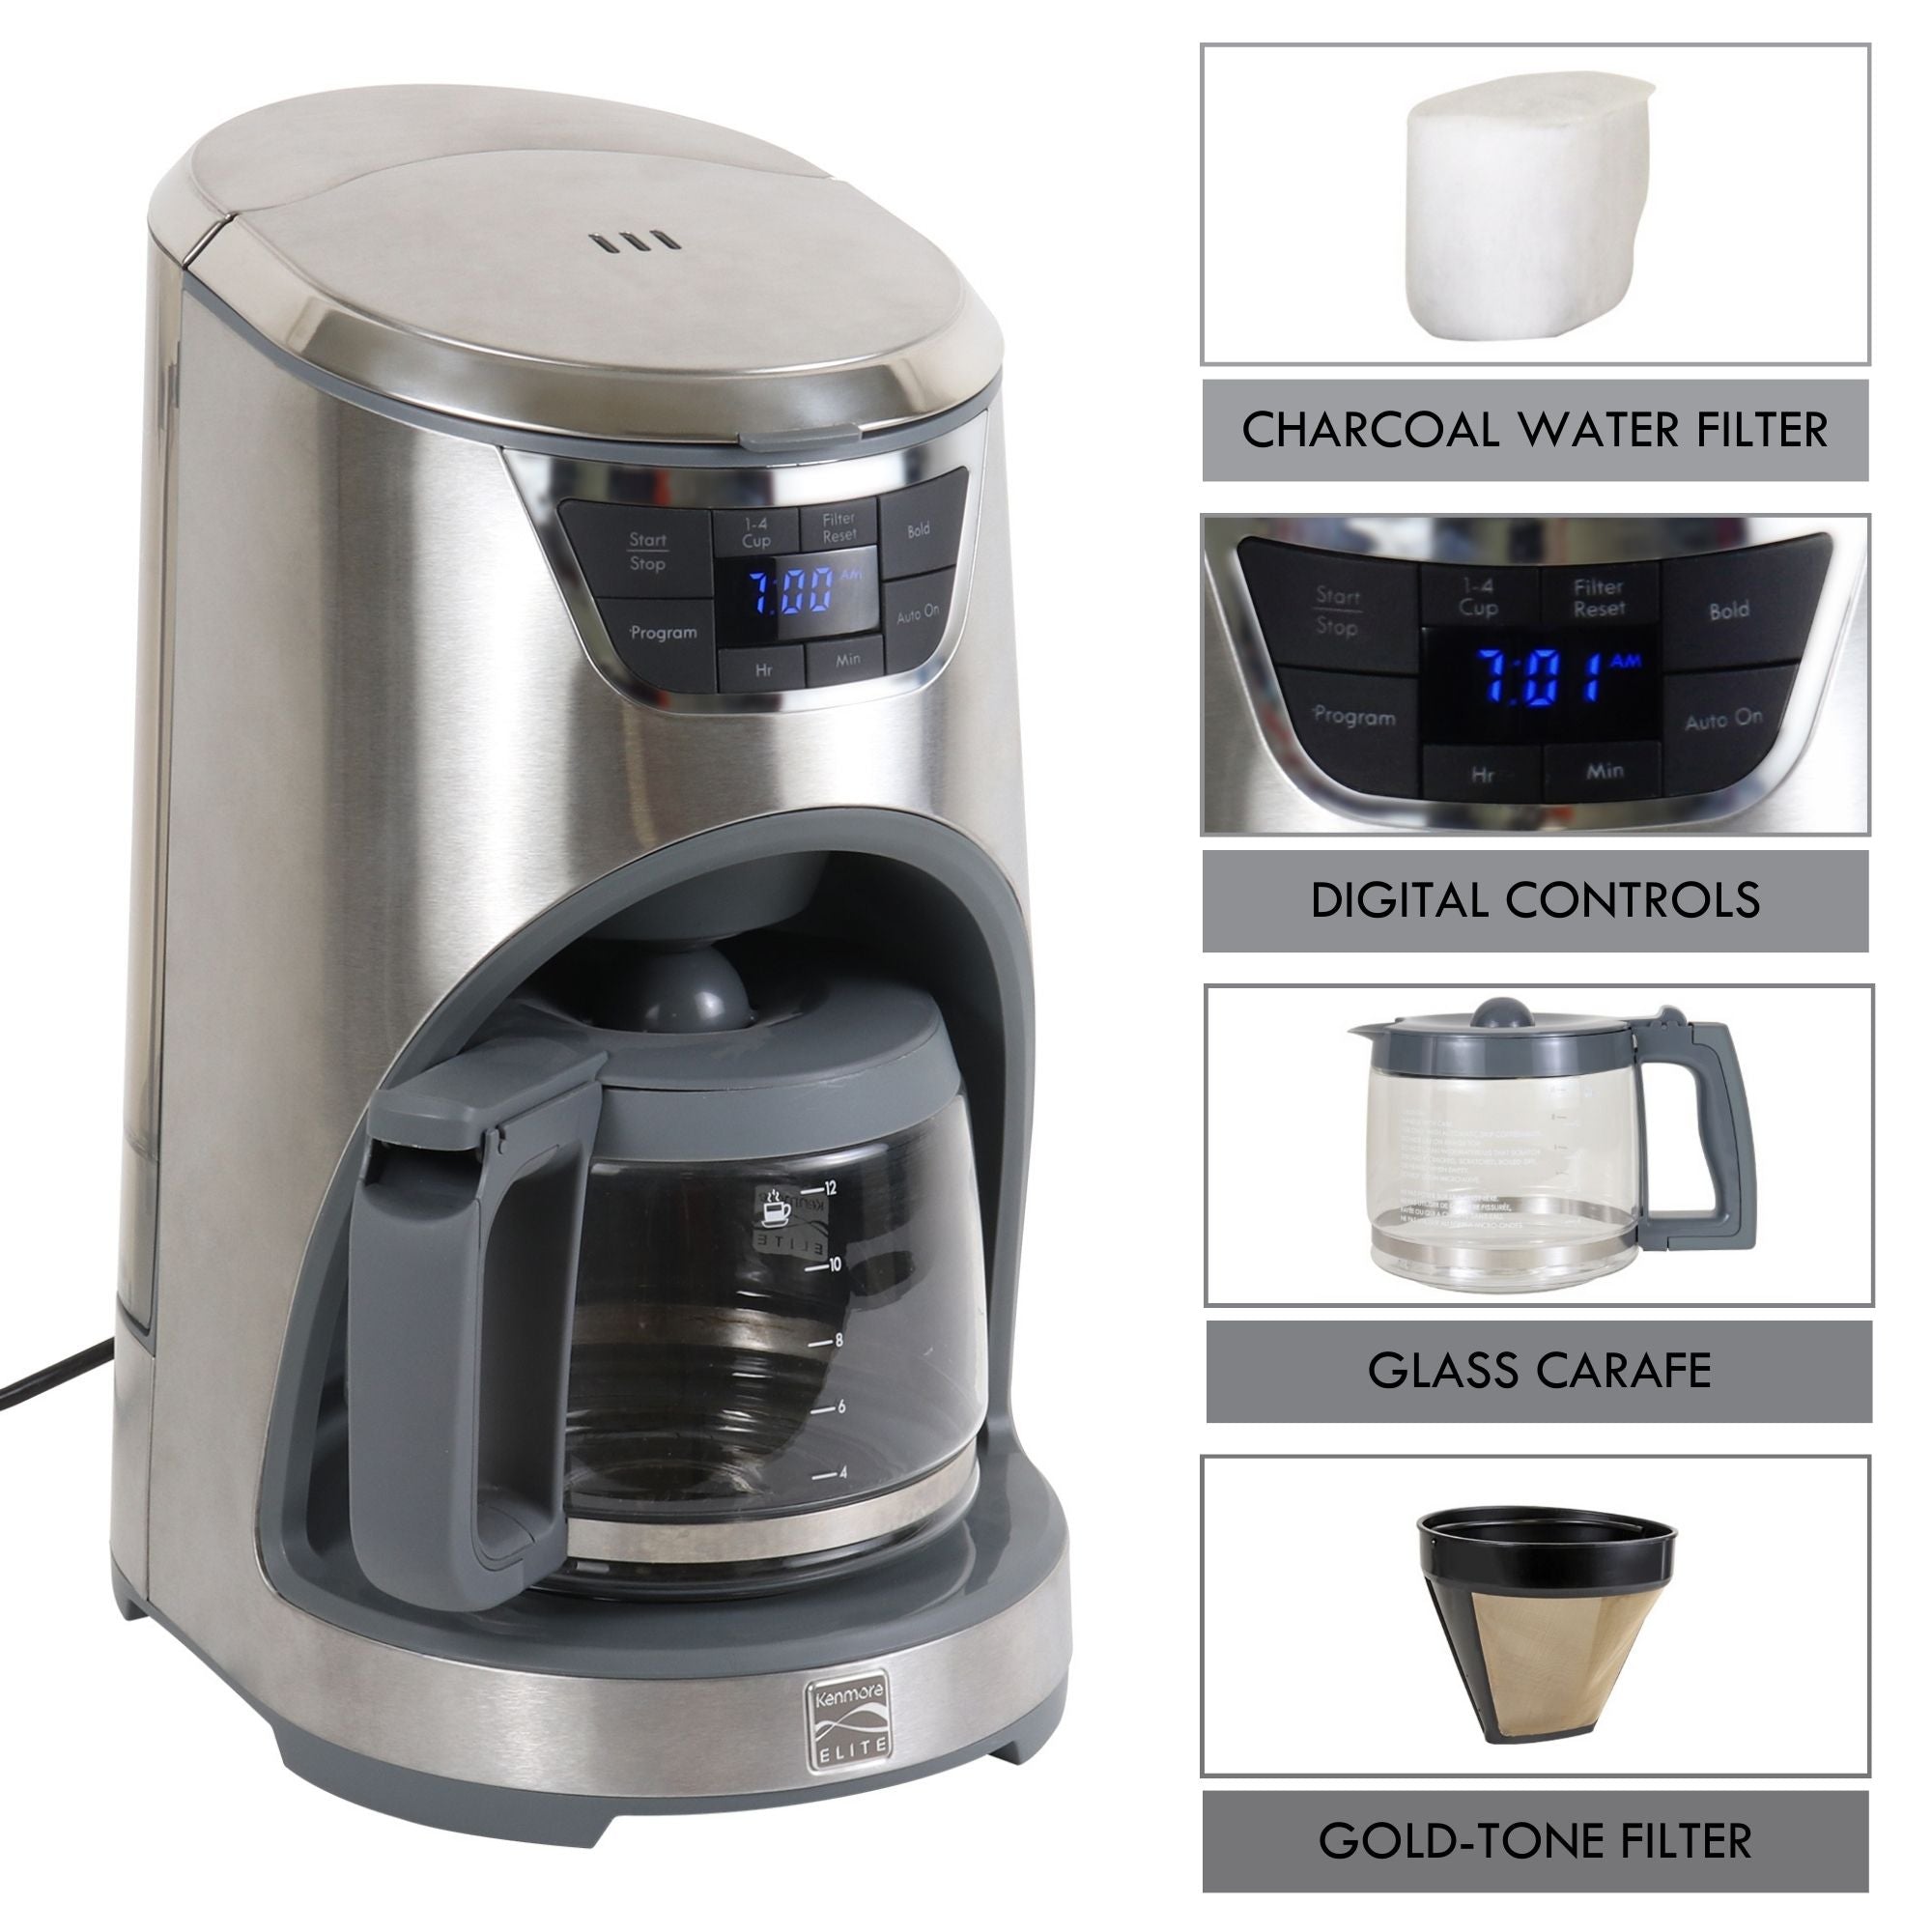 Kenmore Elite 12 cup programmable coffeemaker on a white background on the left with four closeup images on the right of parts, labeled: charcoal water filter; digital controls; glass carafe; gold-tone filter